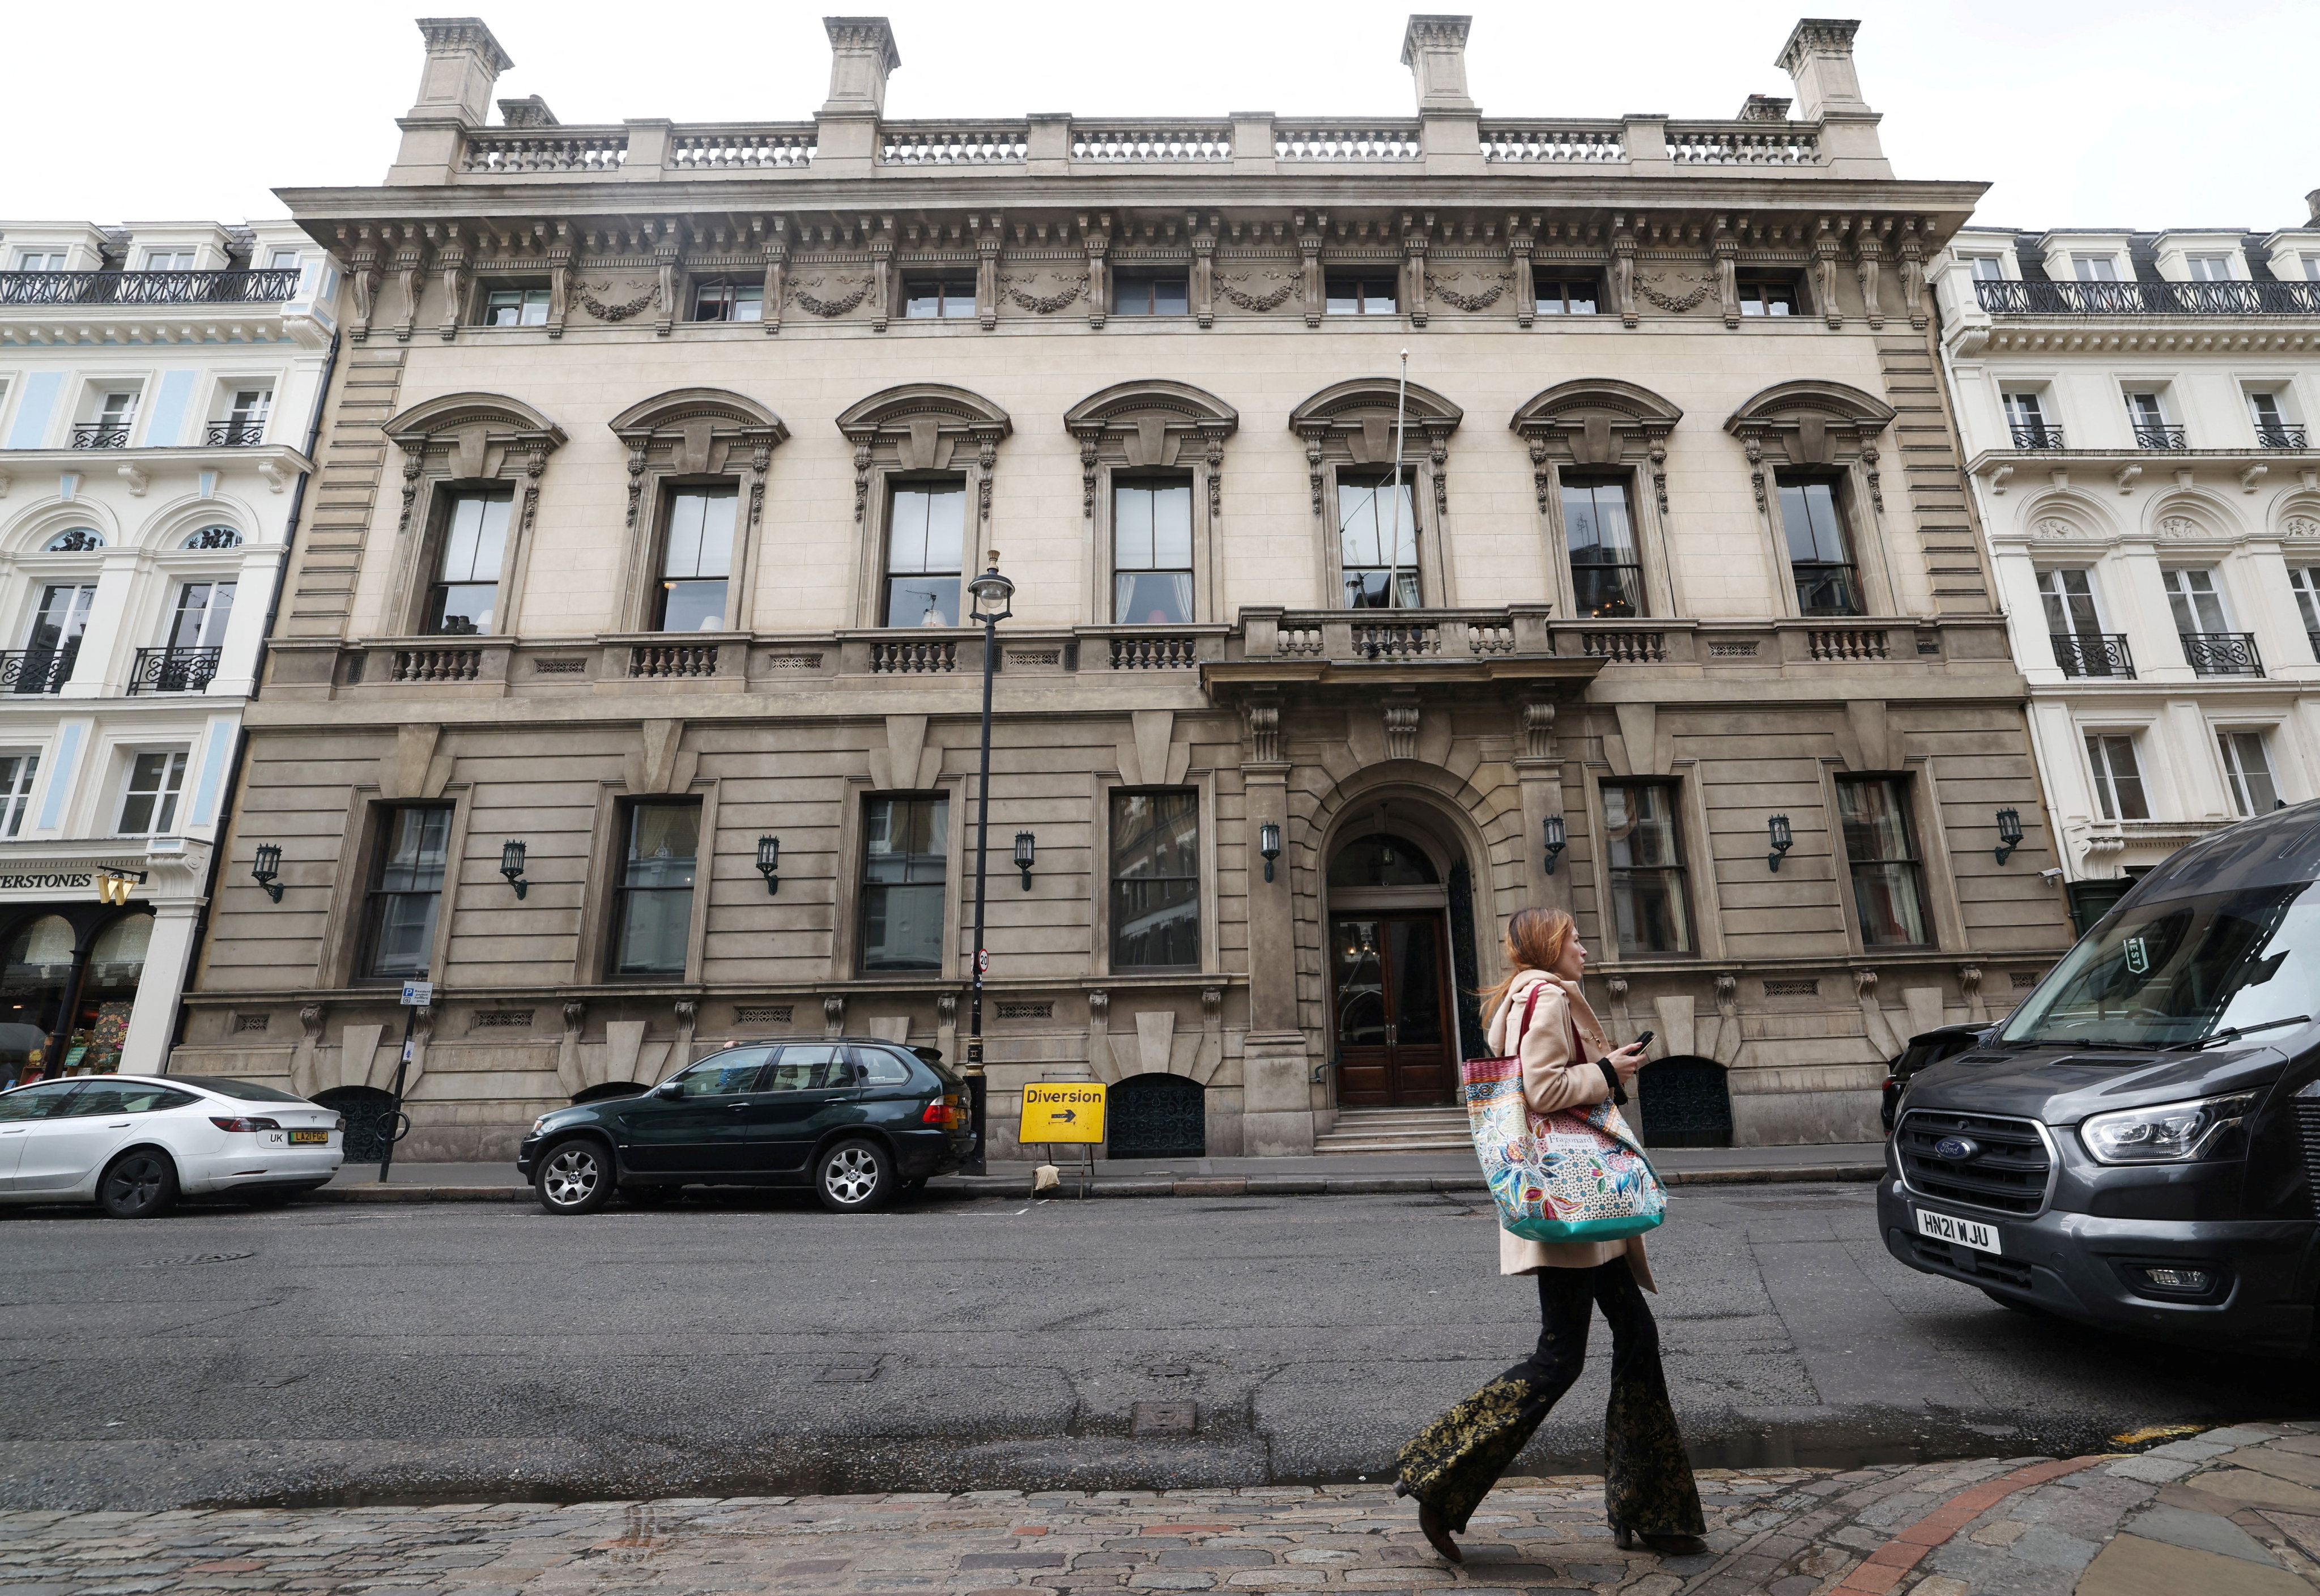 A person walks past the entrance to the Garrick Club, a private member’s club in London, which has voted to finally allow female members. Photo: Reuters